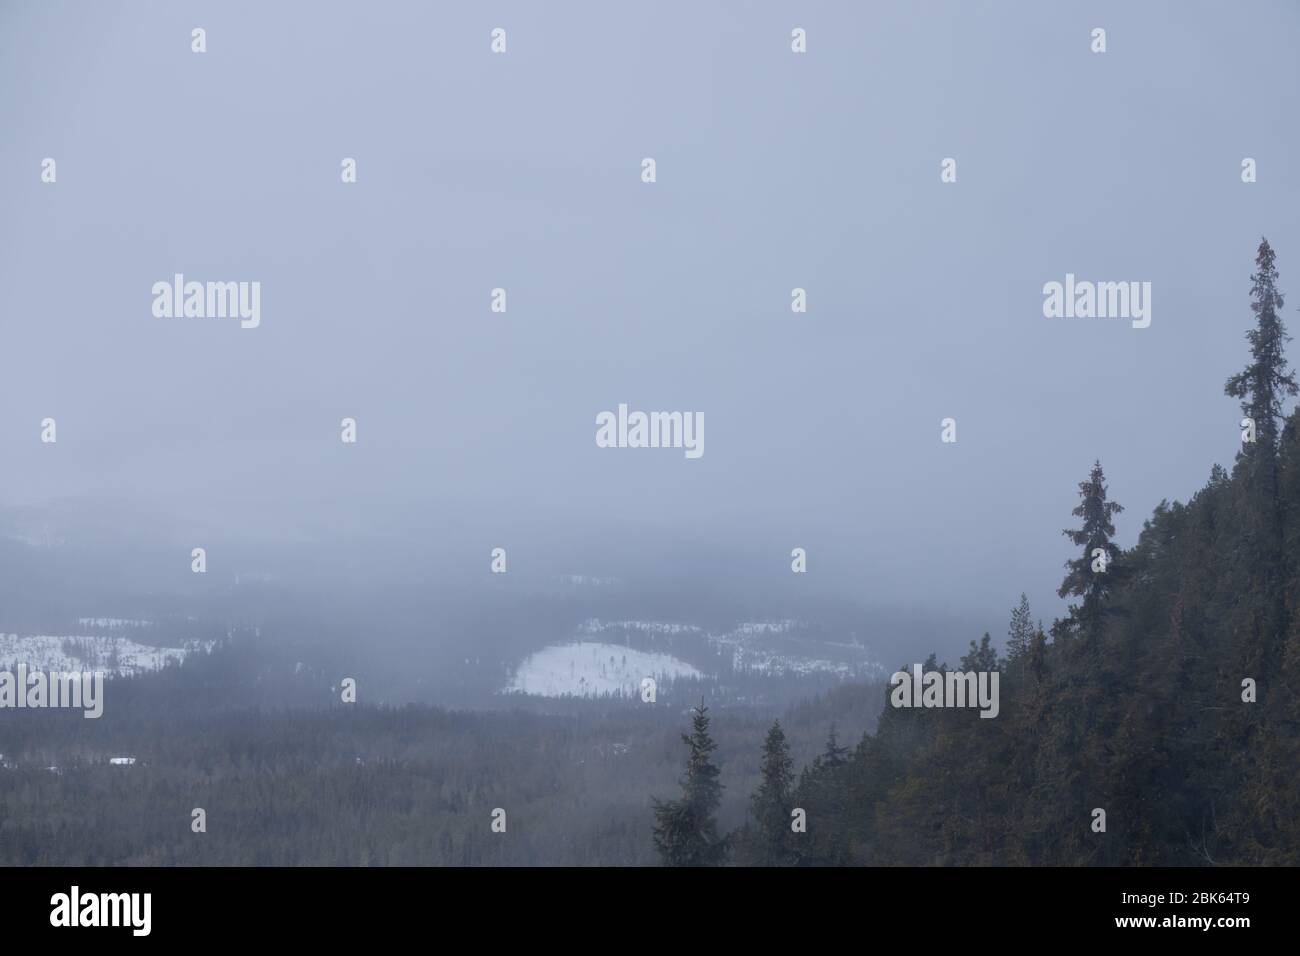 Landscape with foggy mountain. Copy space for text or product display. Stock Photo